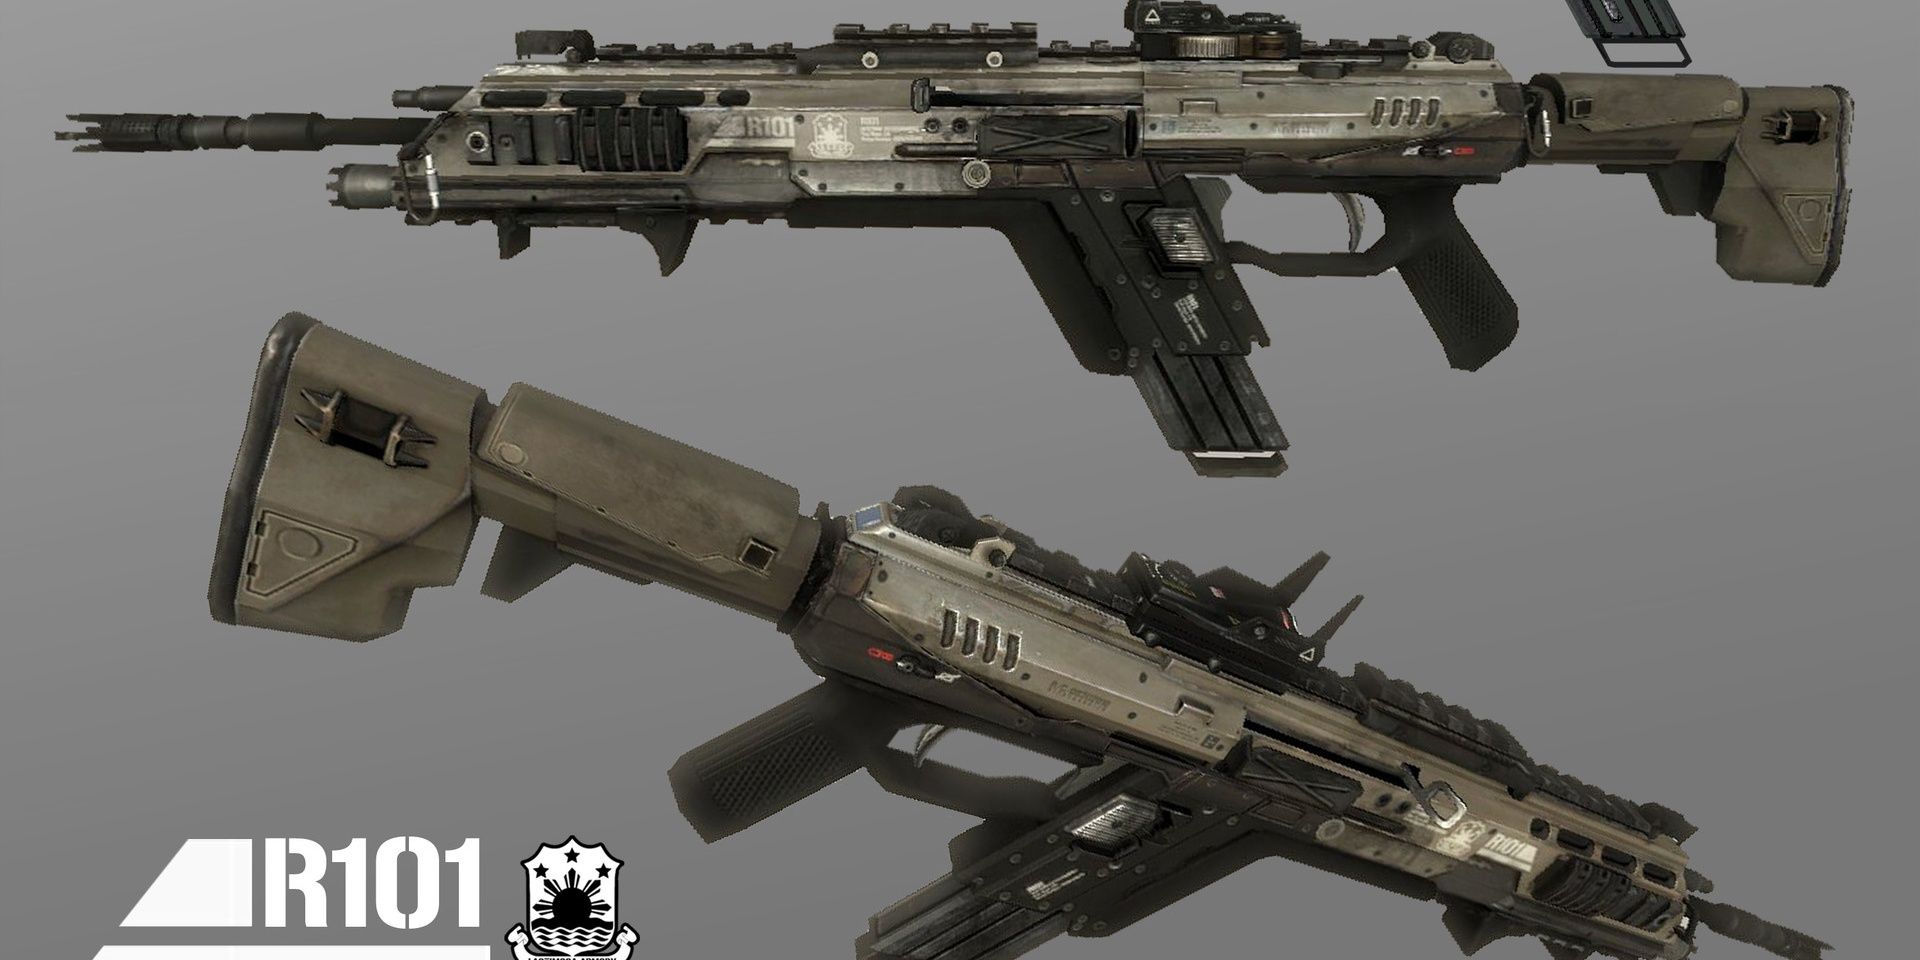 The R-101 Carbine From Titanfall